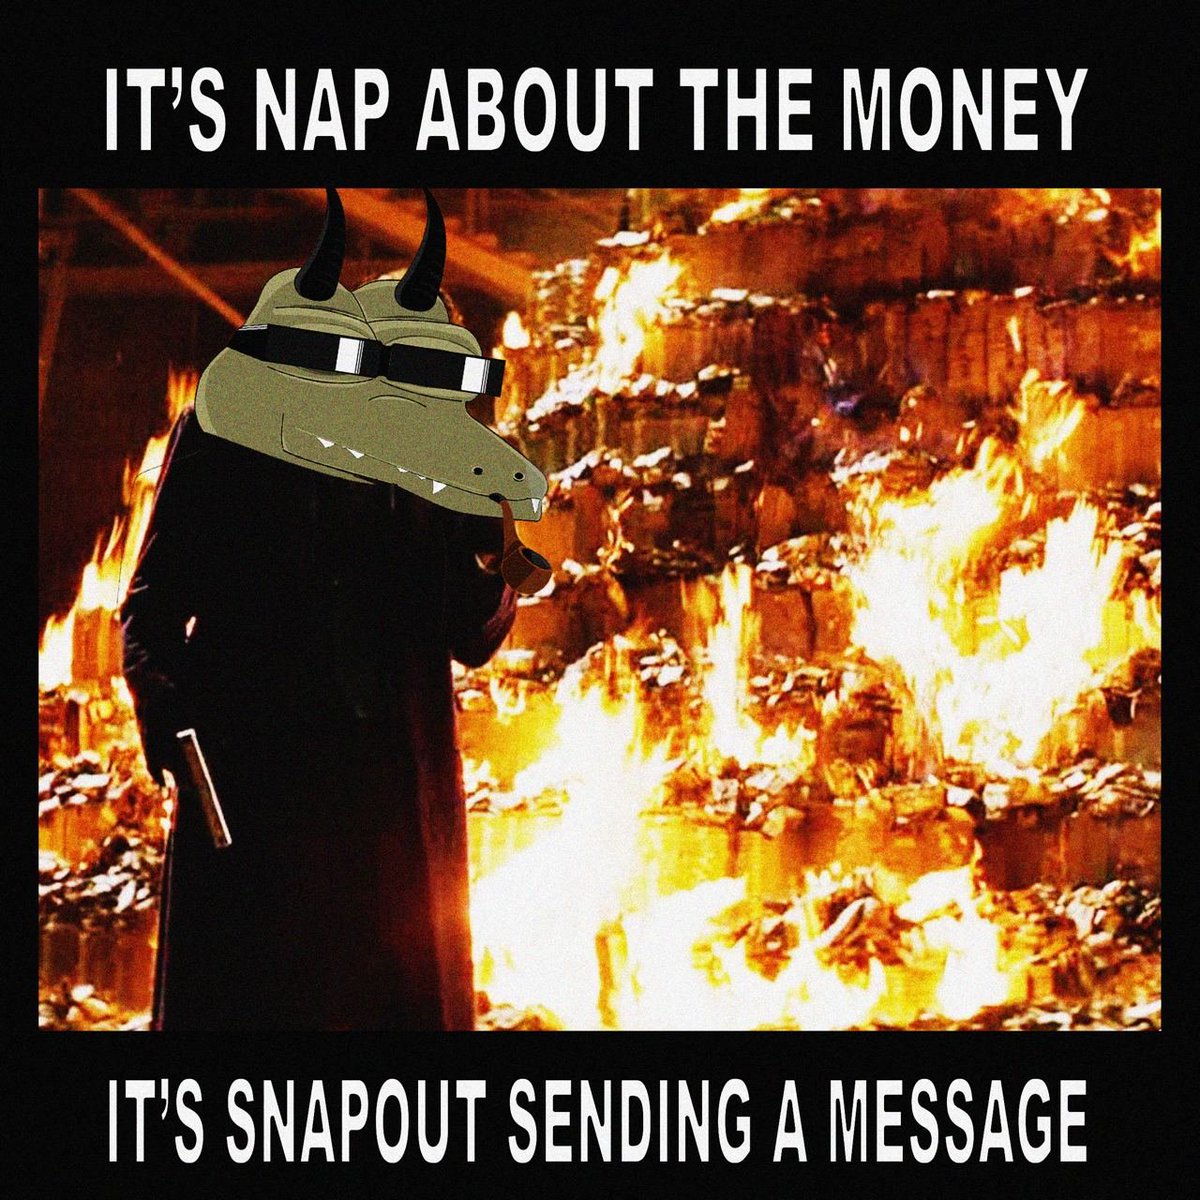 With the wild presale its Time to start the $NAP Afterburn Send $NAP to : 7vbt8VsEzWUnLT4khjBMVB79TJynGwGurz8aT85uuzur When certain caps are achieved, the burn is started and the existing tokens in the wallet are burned. You will get nothing in return, just the feeling.